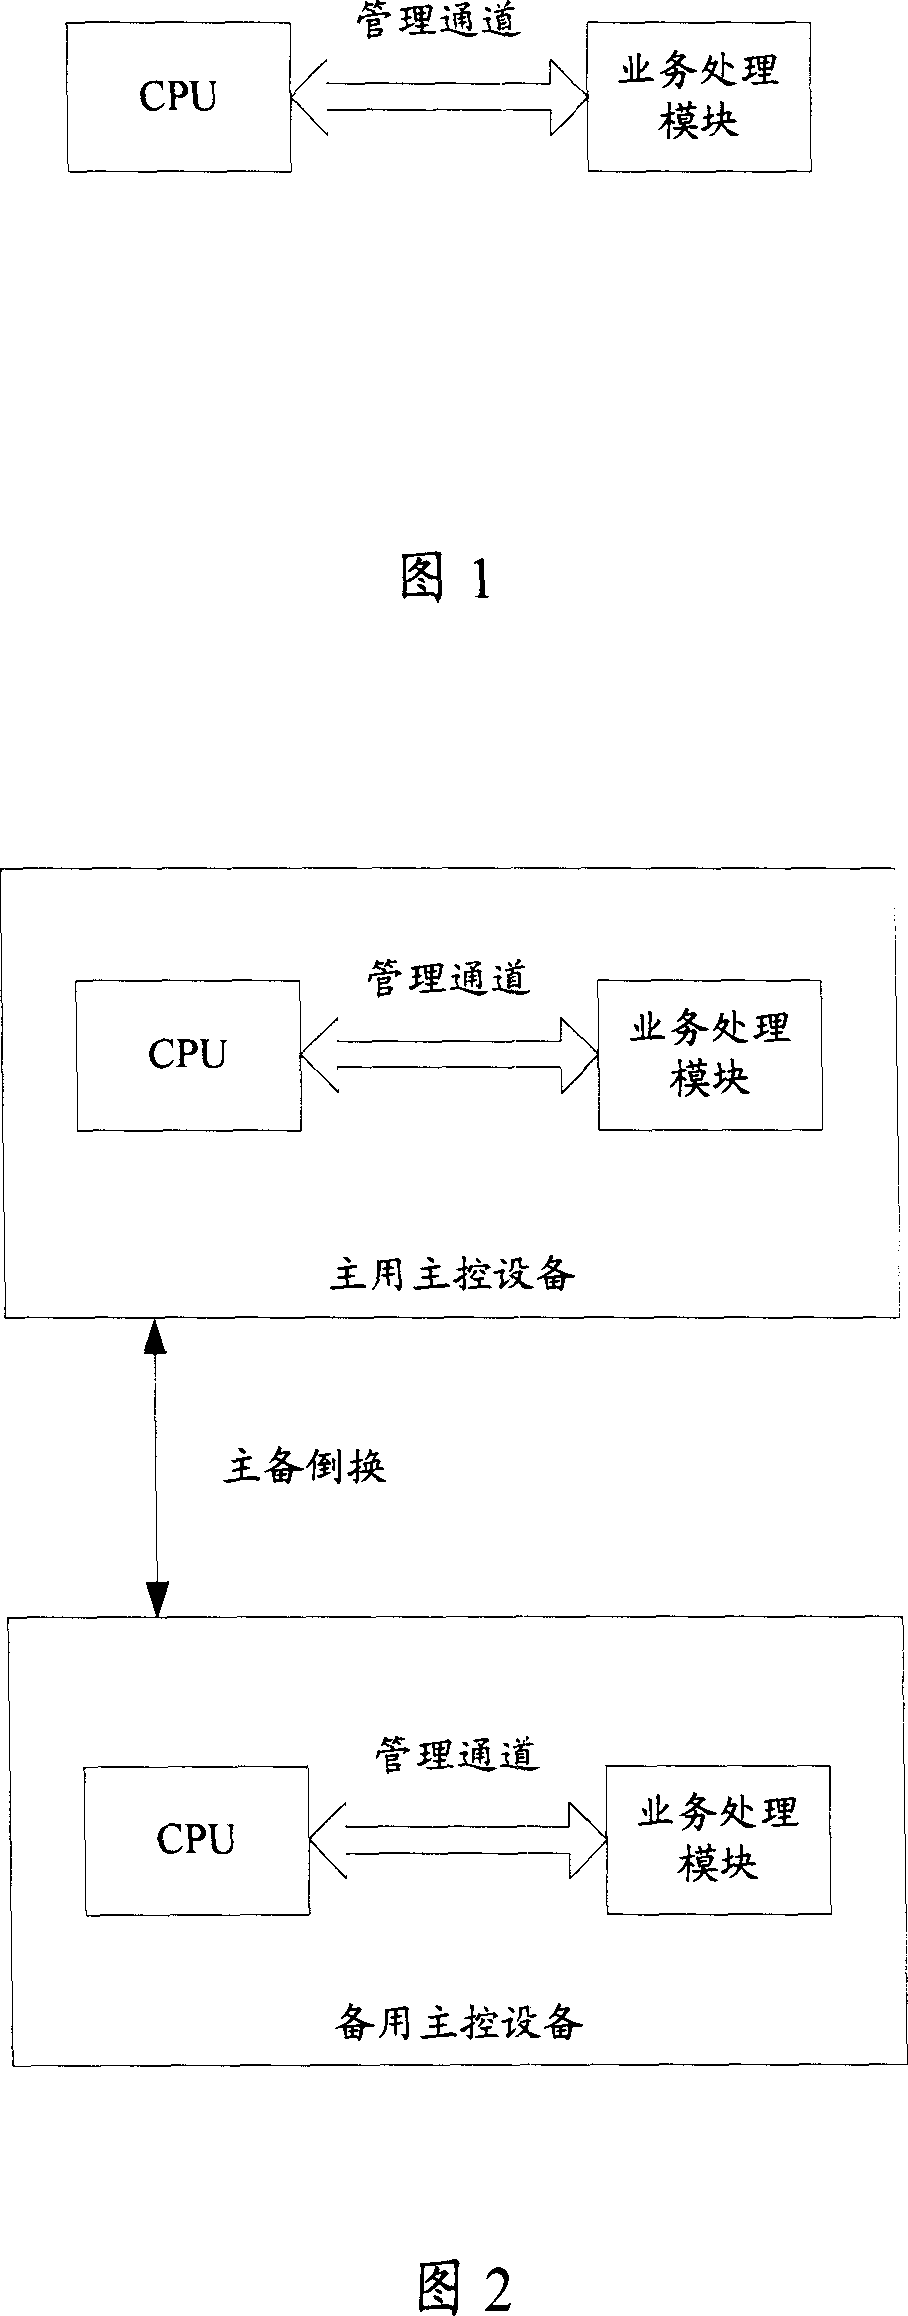 A master control device with double CPU